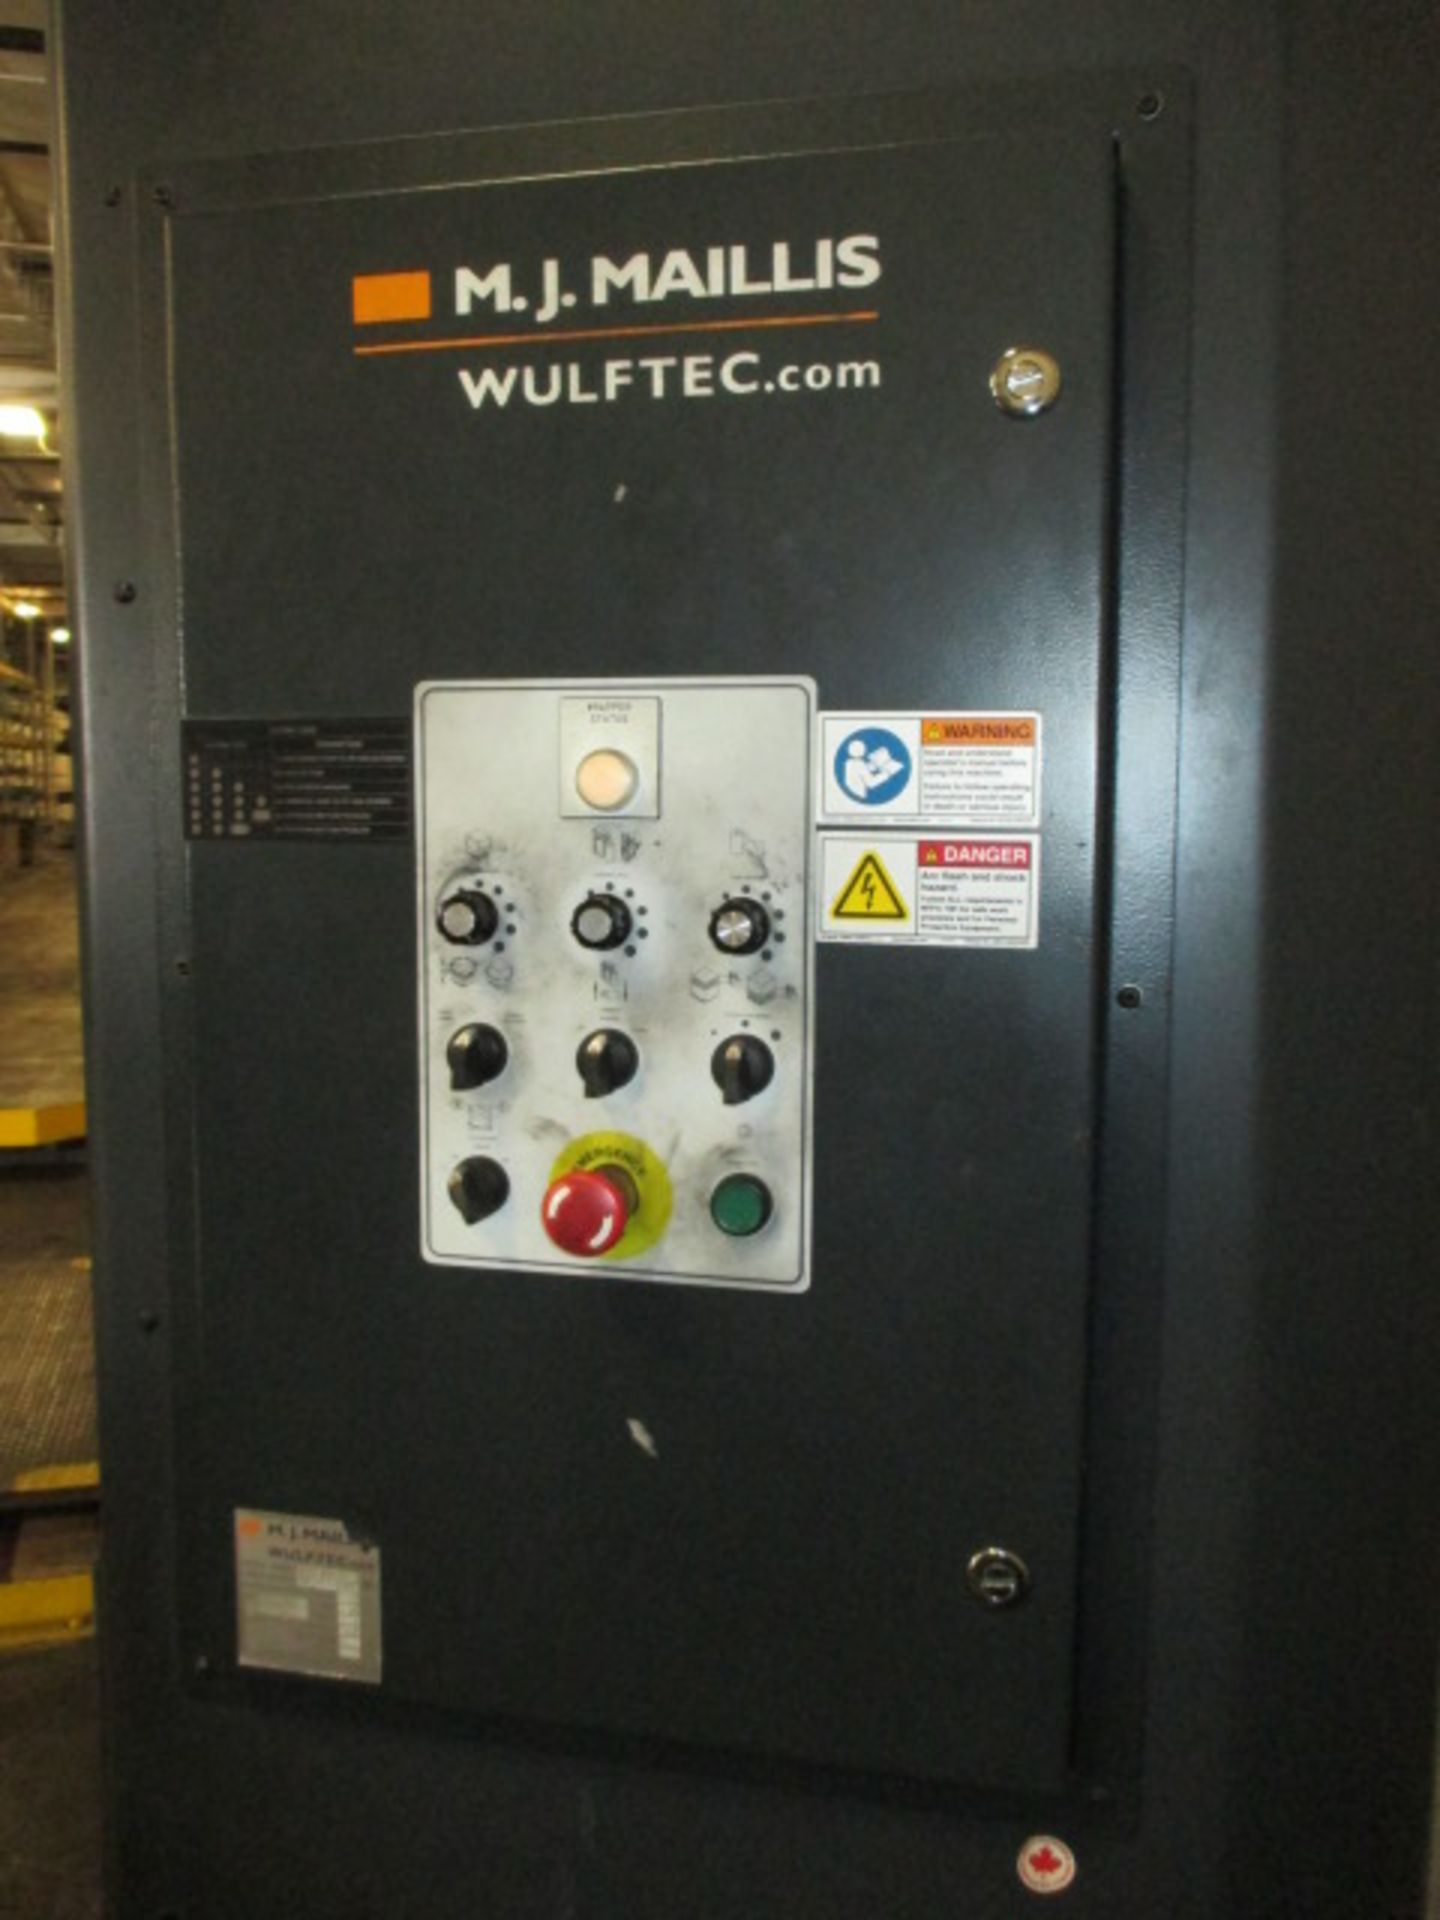 Wulftec / M.J. Maillis WSMH-200-B Semi-Automatic Turntable Stretch Wrapper. 120V, 60Hz, 15A. S/N- - Image 3 of 5